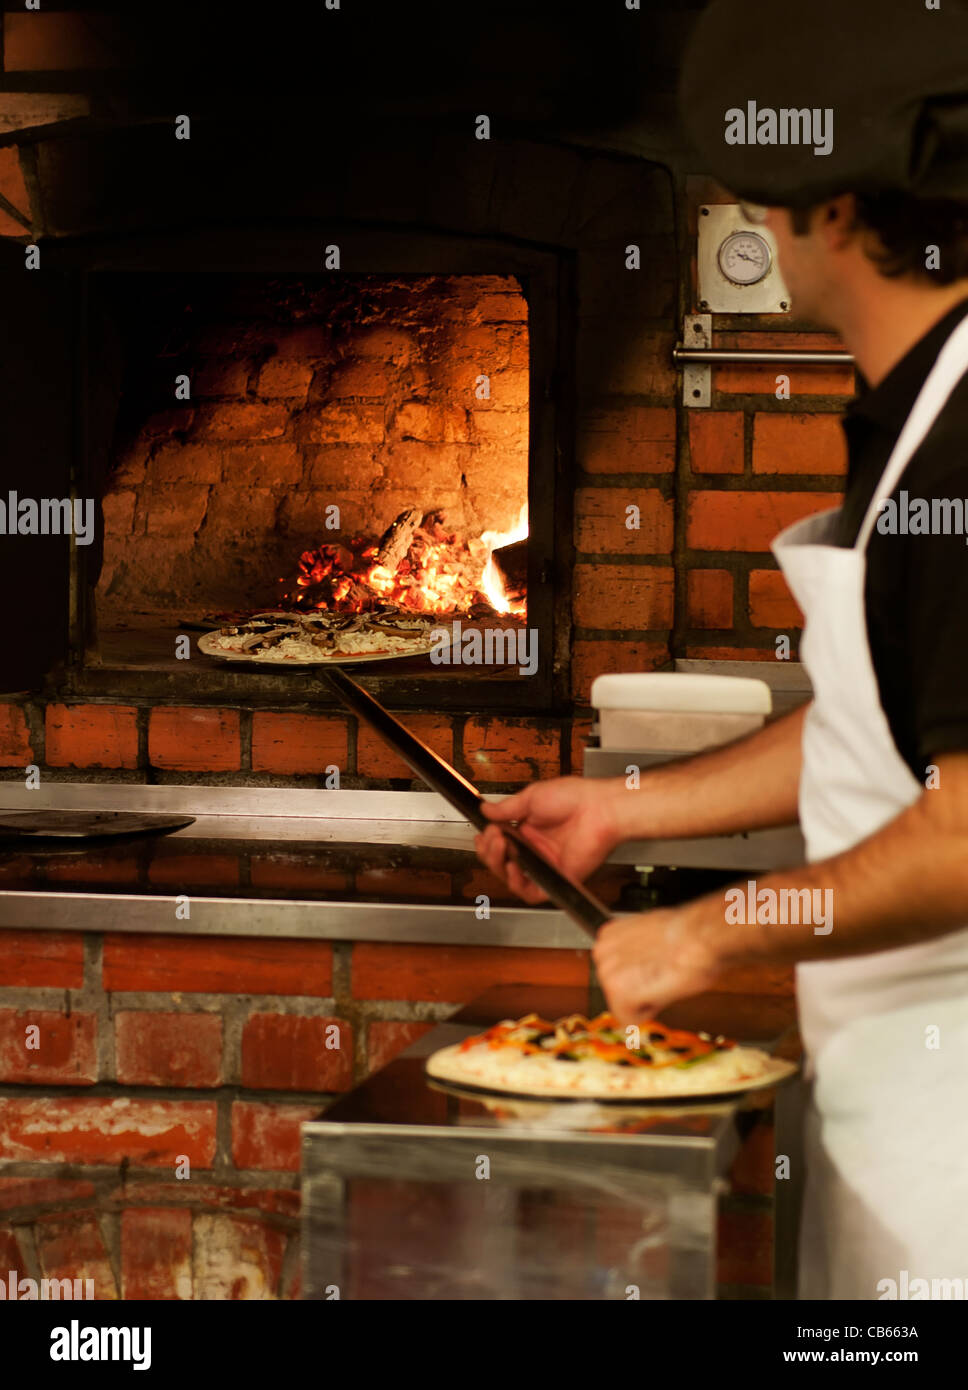 A chef putting a pizza in a wood-fired oven in the classic Italian style Stock Photo